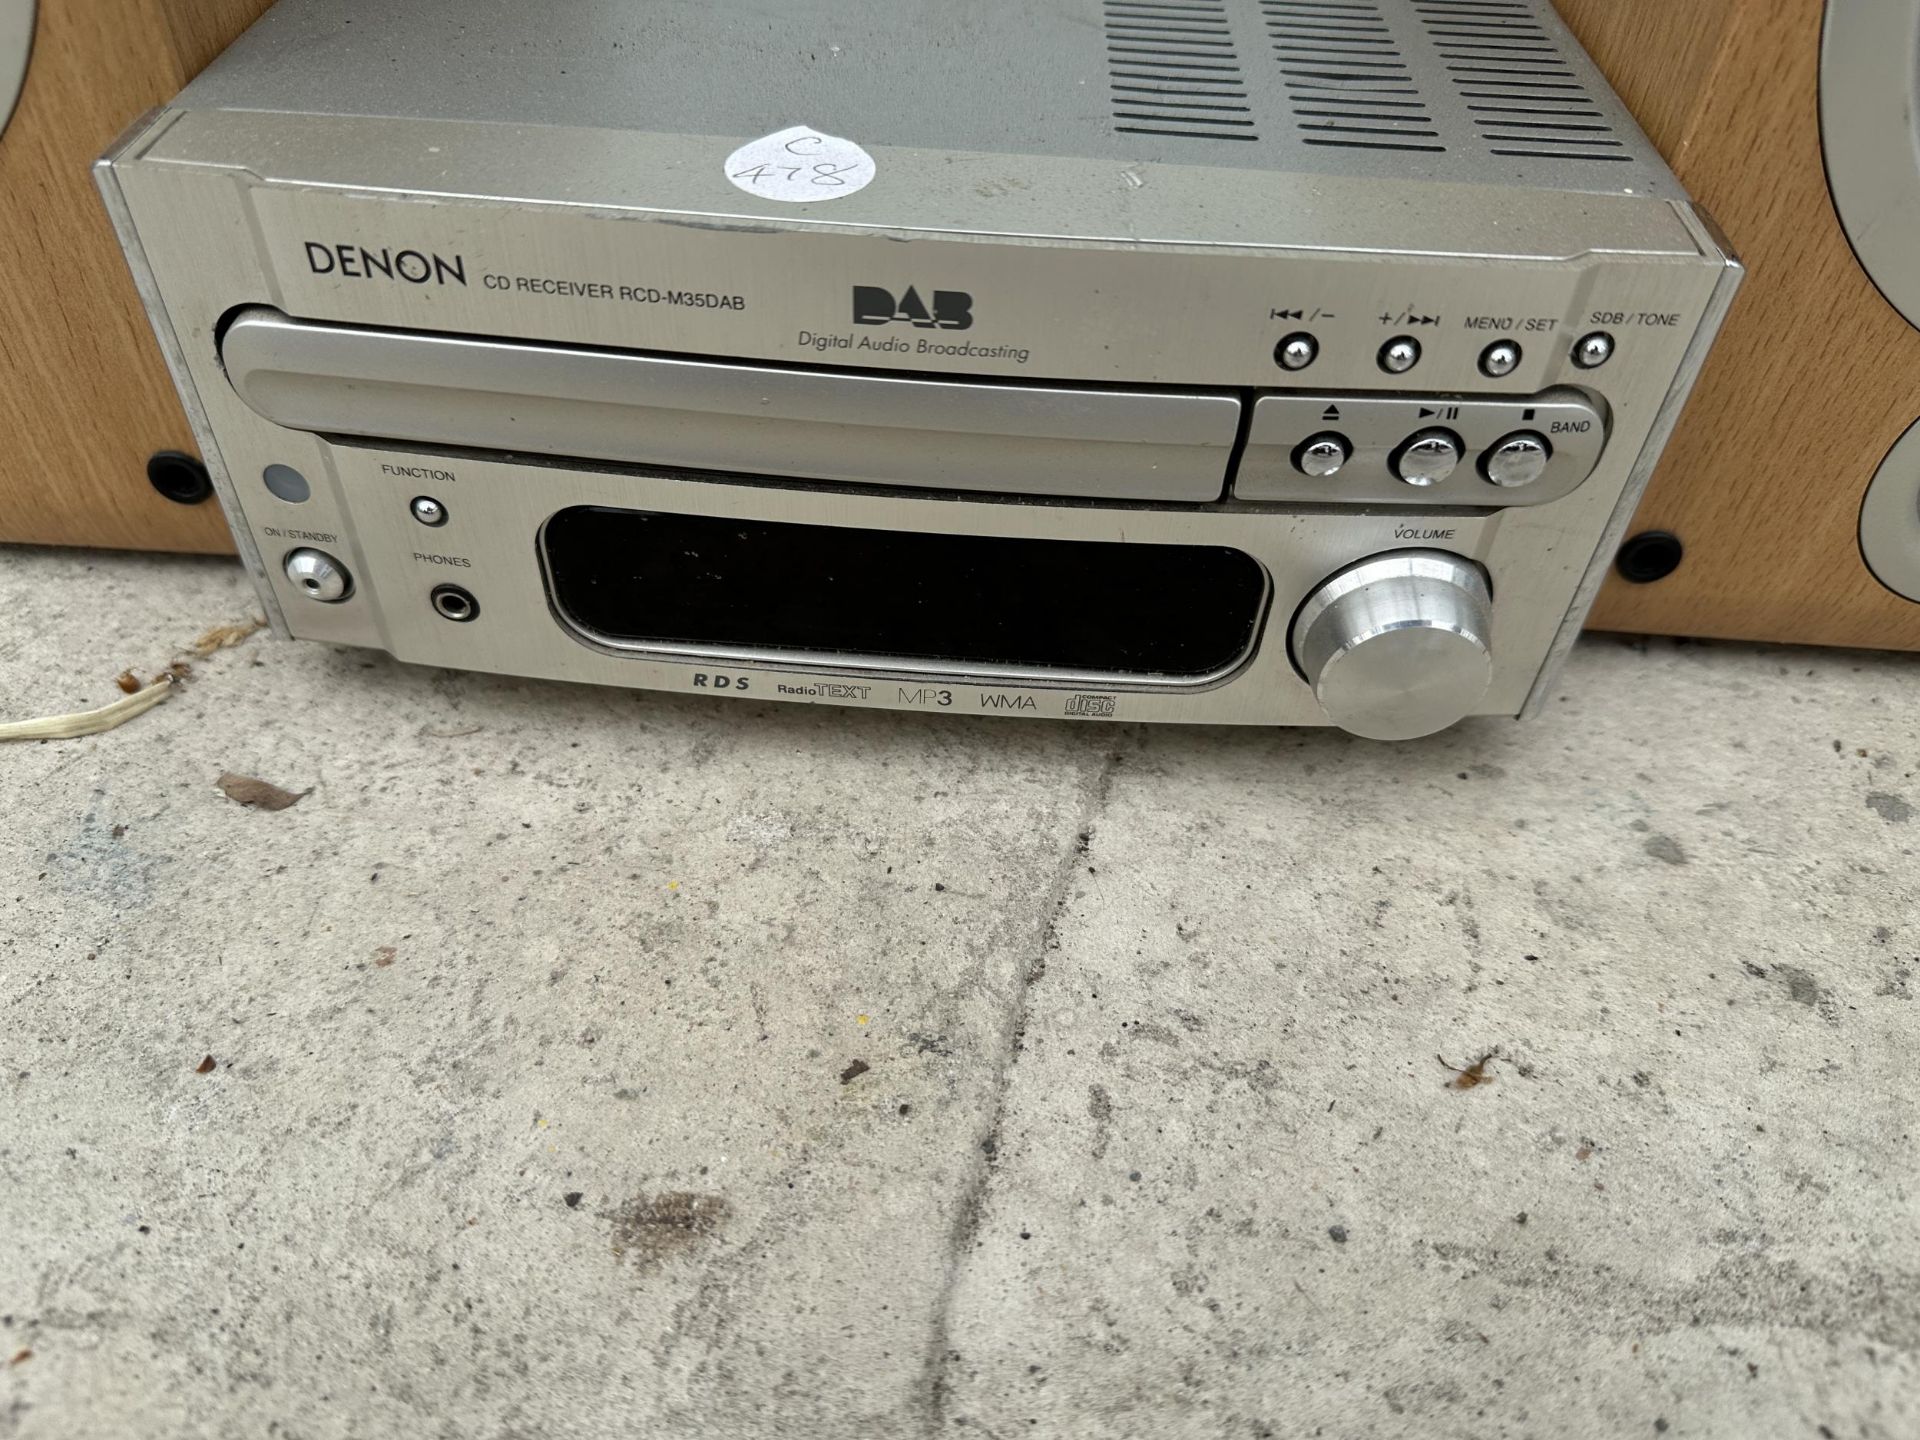 A DENON DAB RADIO WITH A PAIR OF SPEAKERS - Image 2 of 2